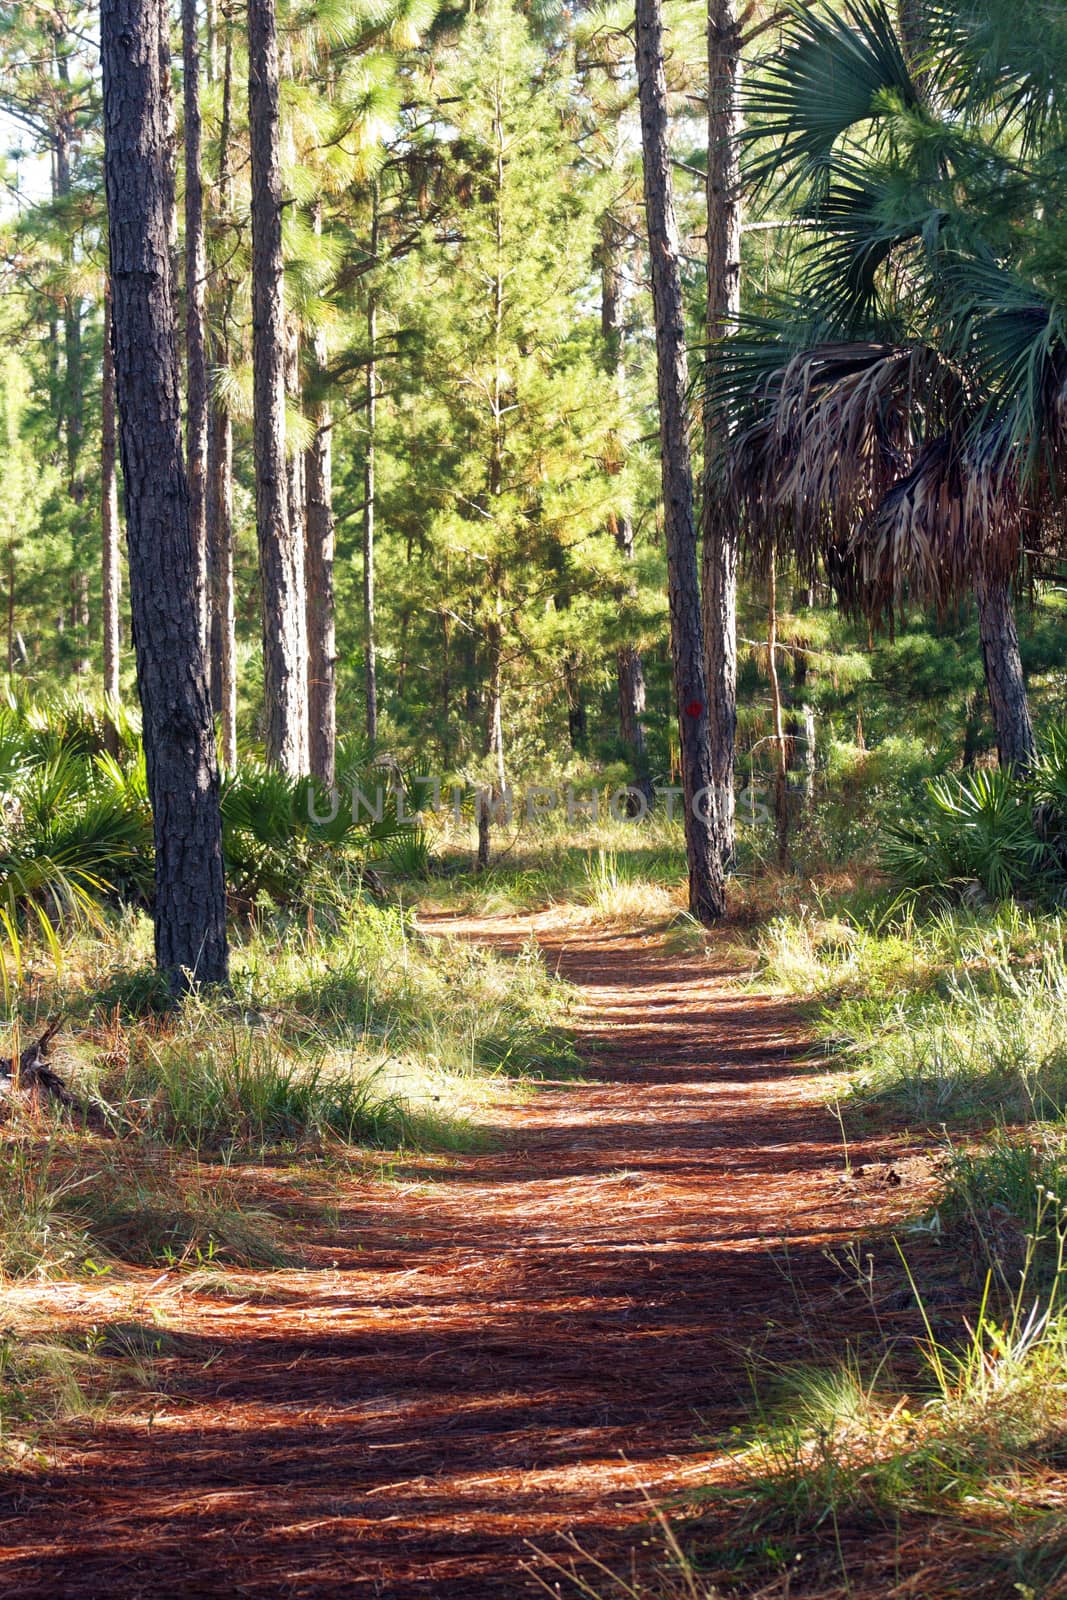 A trail carpeted with pine needles winds it way through a southern pine forest.